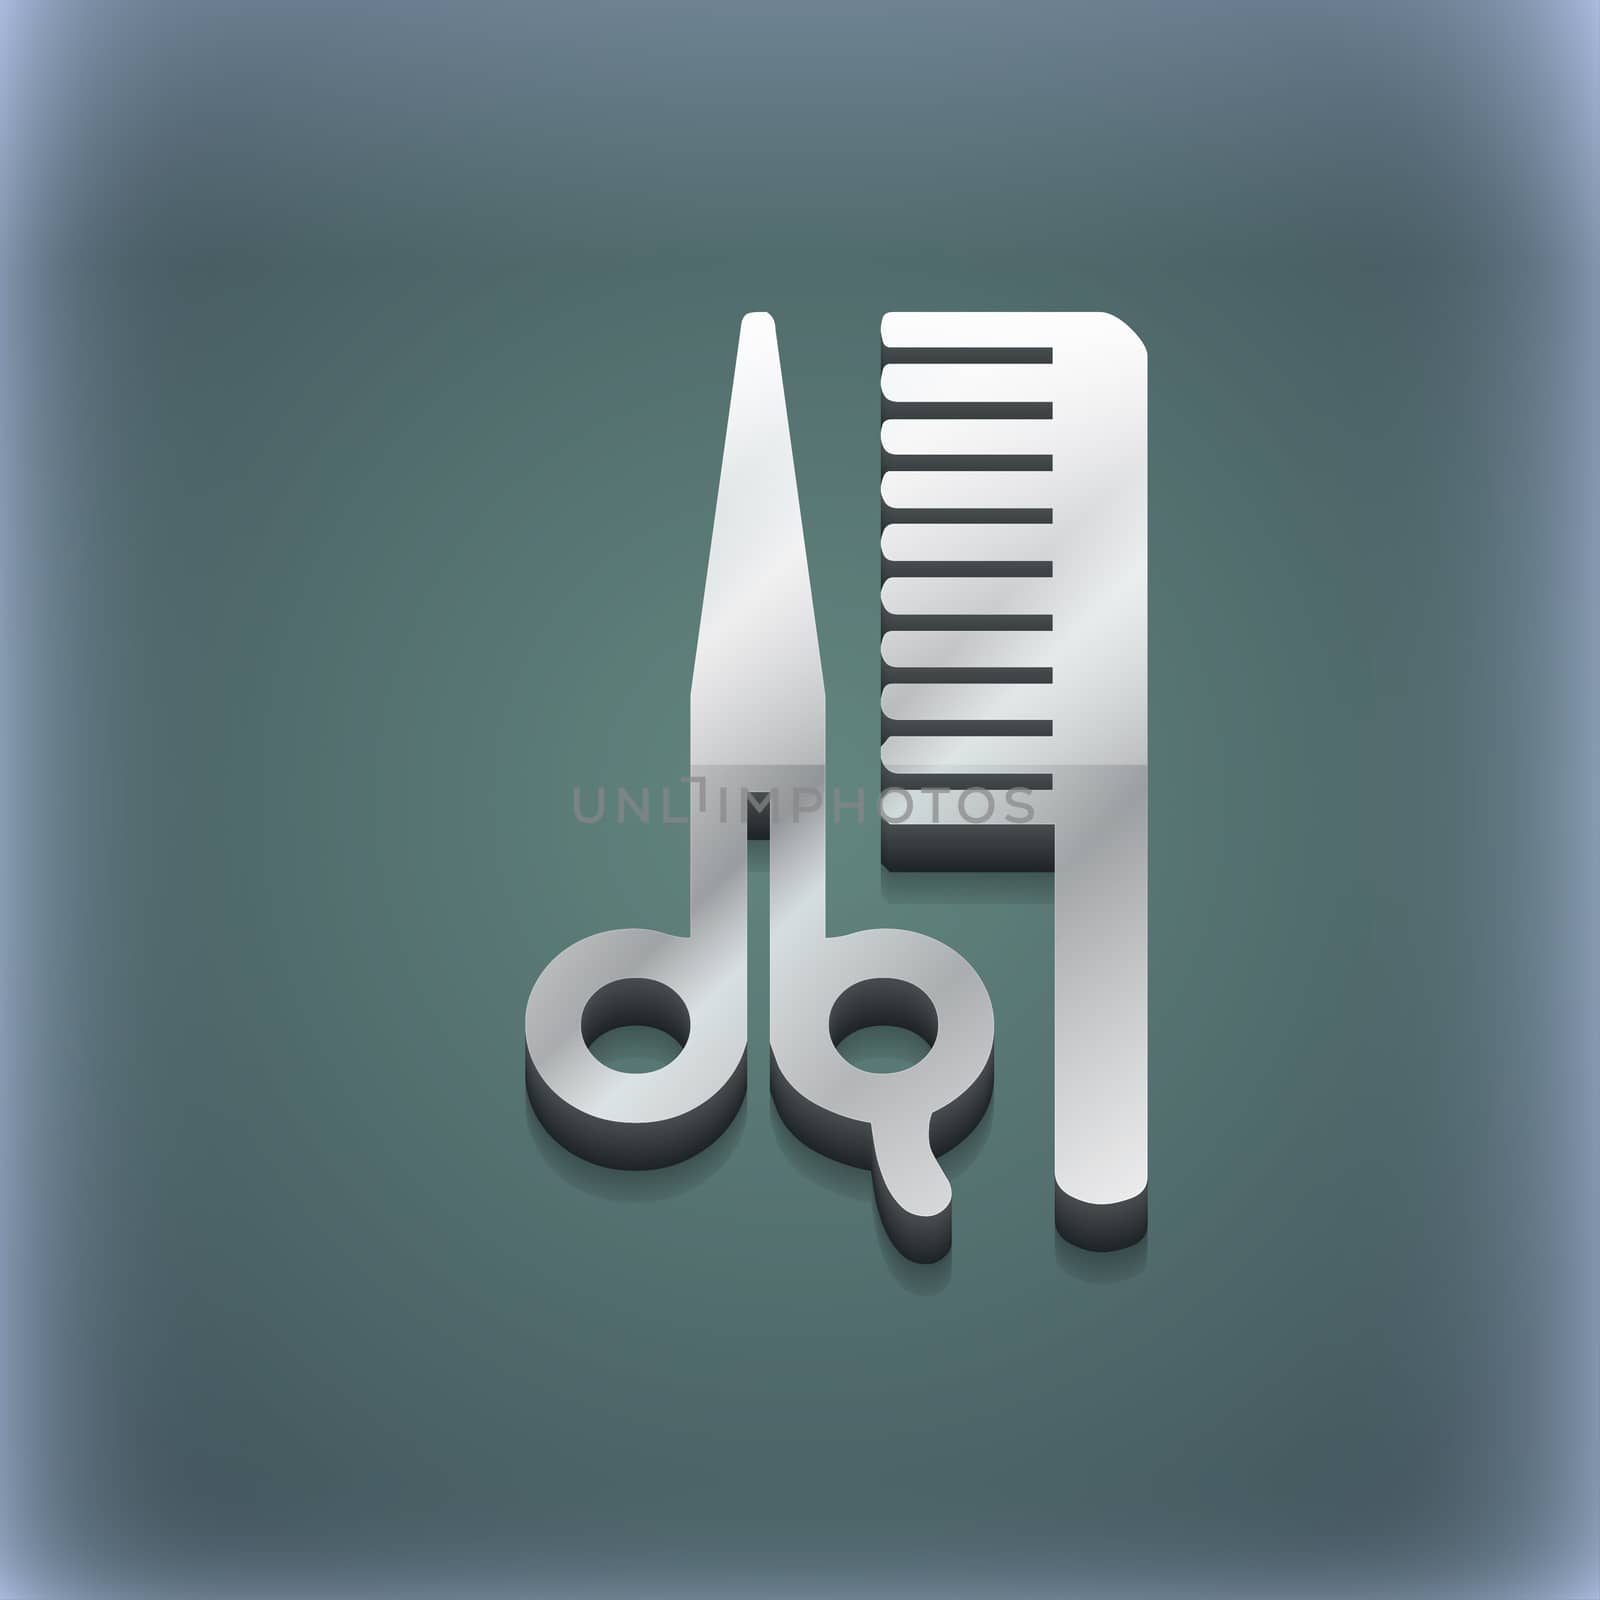 hair icon symbol. 3D style. Trendy, modern design with space for your text illustration. Raster version